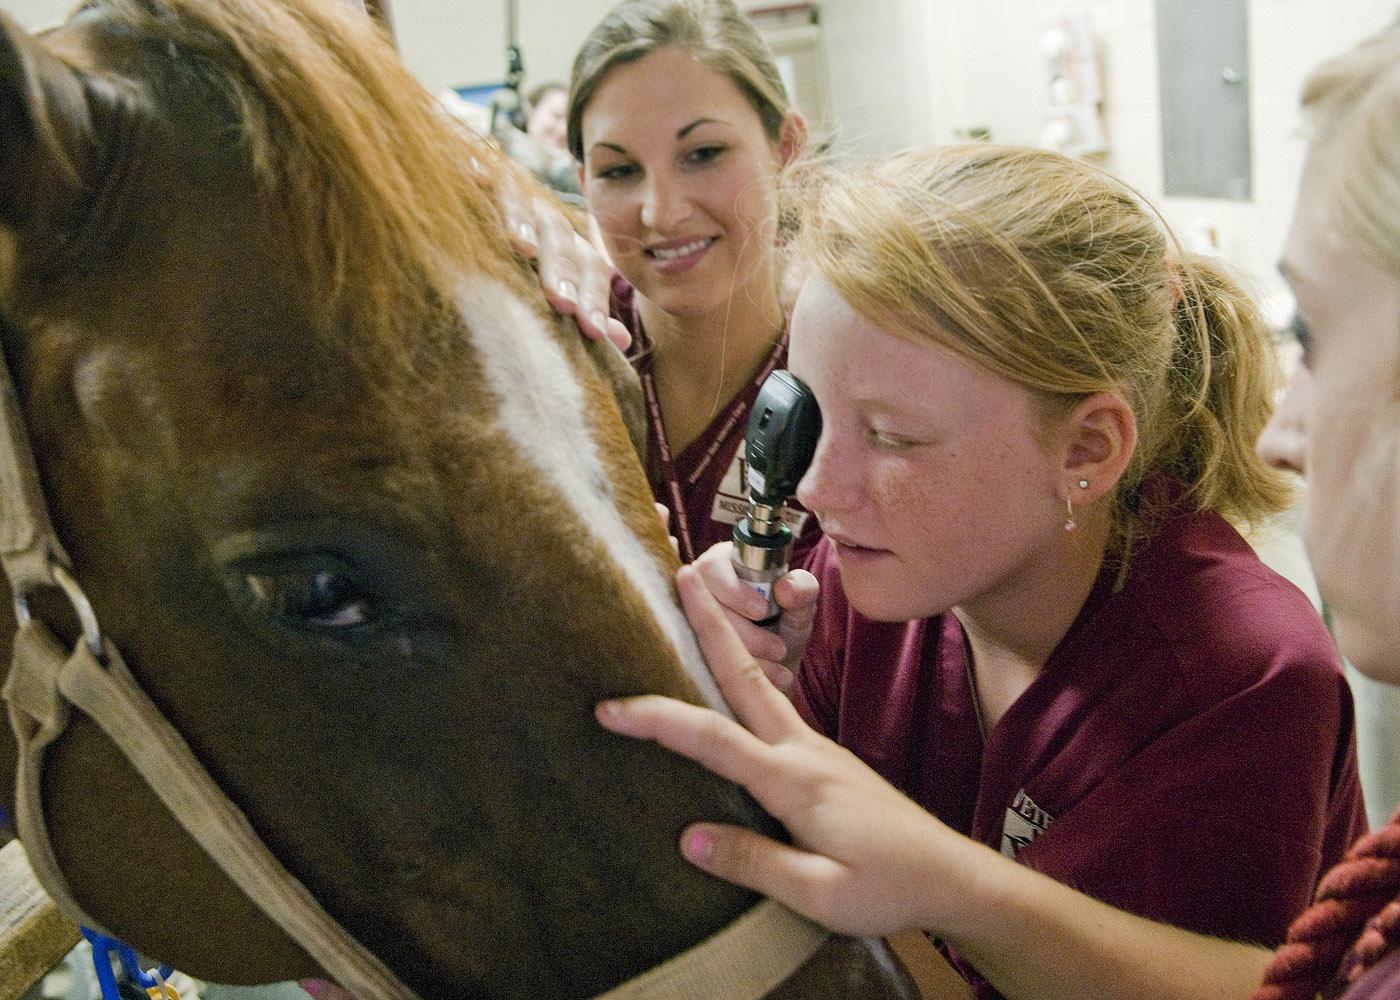 Mississippi State University College of Veterinary Medicine student Susannah Brent, left, shows vet camp participant Santana Shelton how to use an ophthalmoscope to examine a horse's eye. (Photo by MSU College of Veterinary Medicine/Tom Thompson)